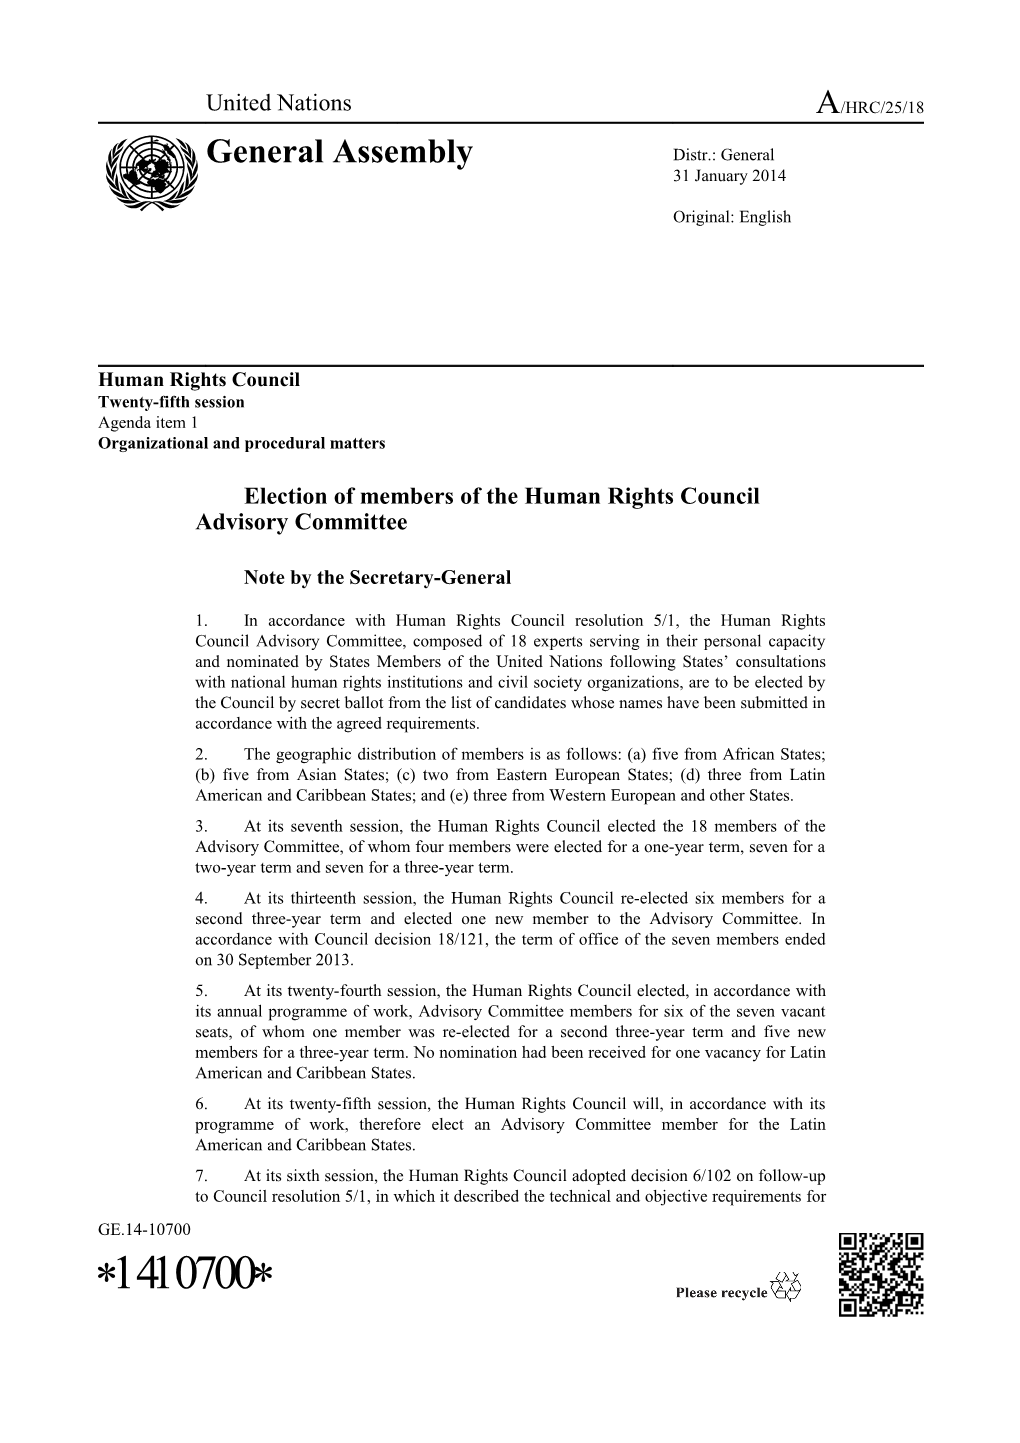 Election of Members of the Human Rights Council Advisory Committee